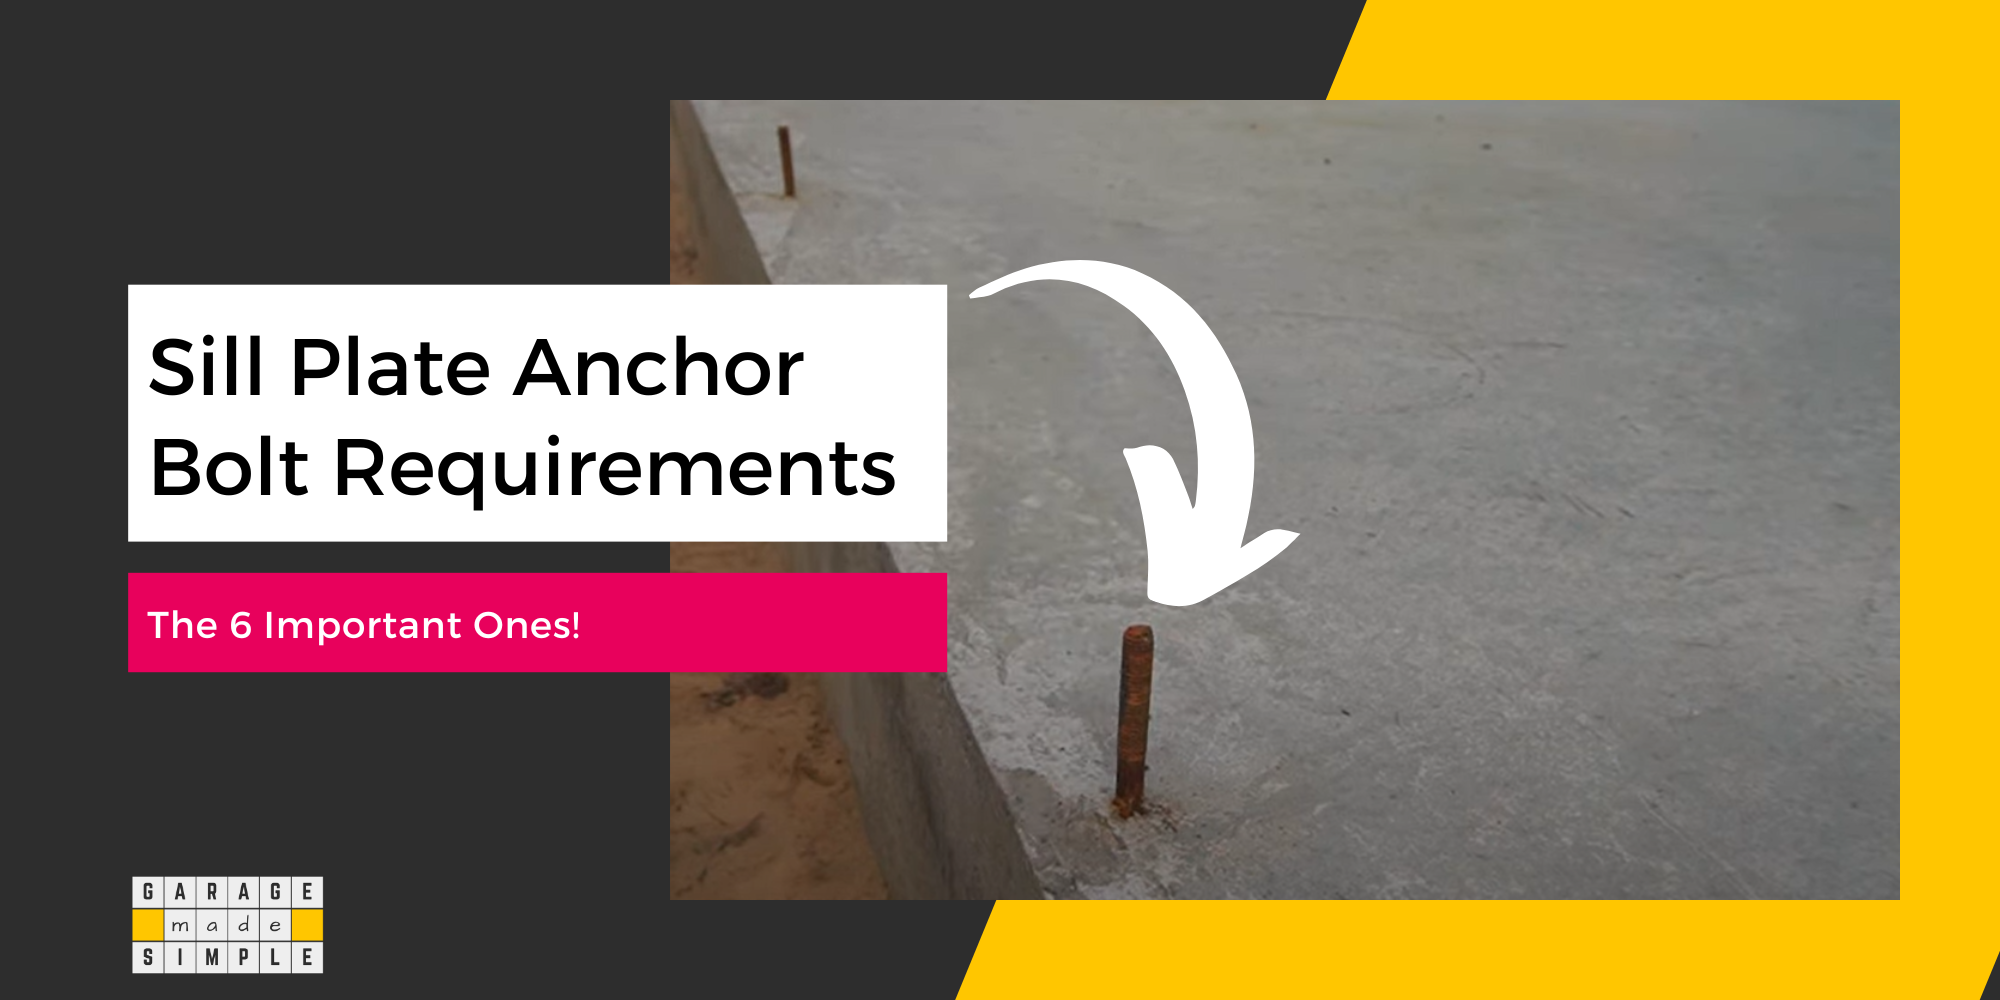 Sill Plate Anchor Bolt Requirements: The 6 Important Ones!